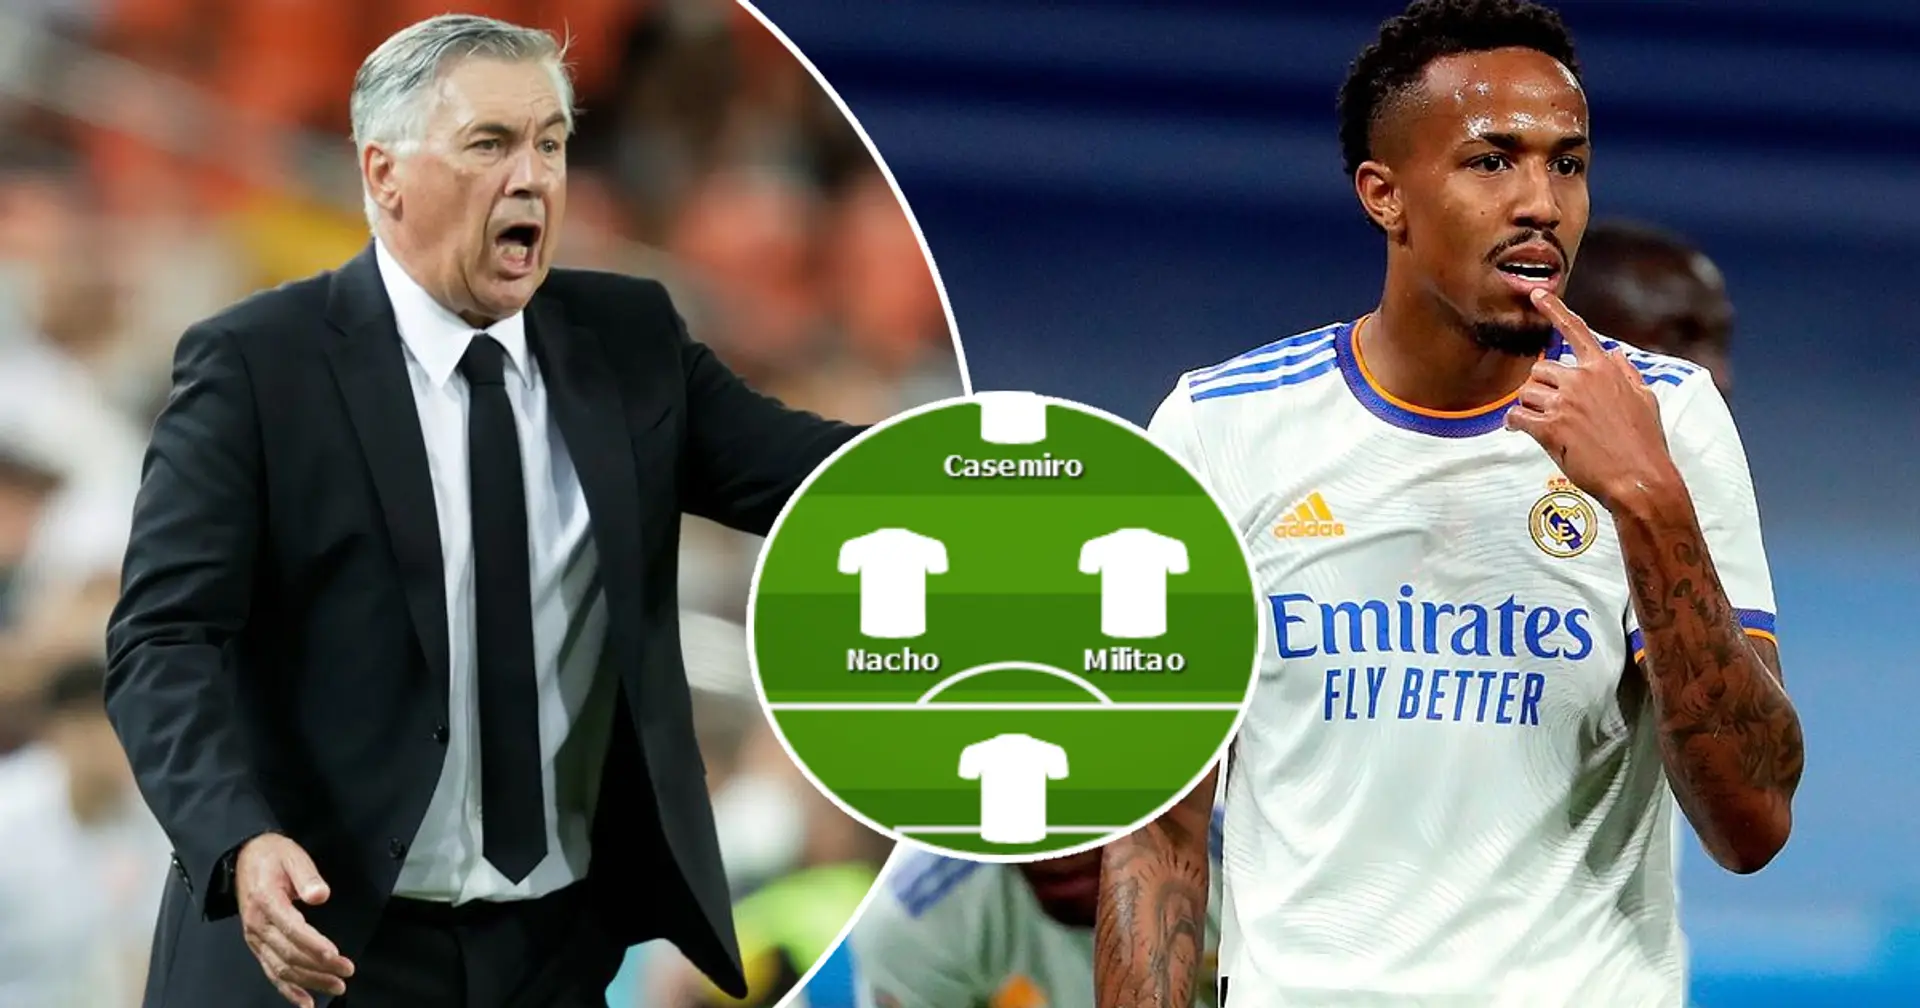 Team news for Real Madrid vs Sevilla, probale line-ups, stats and more